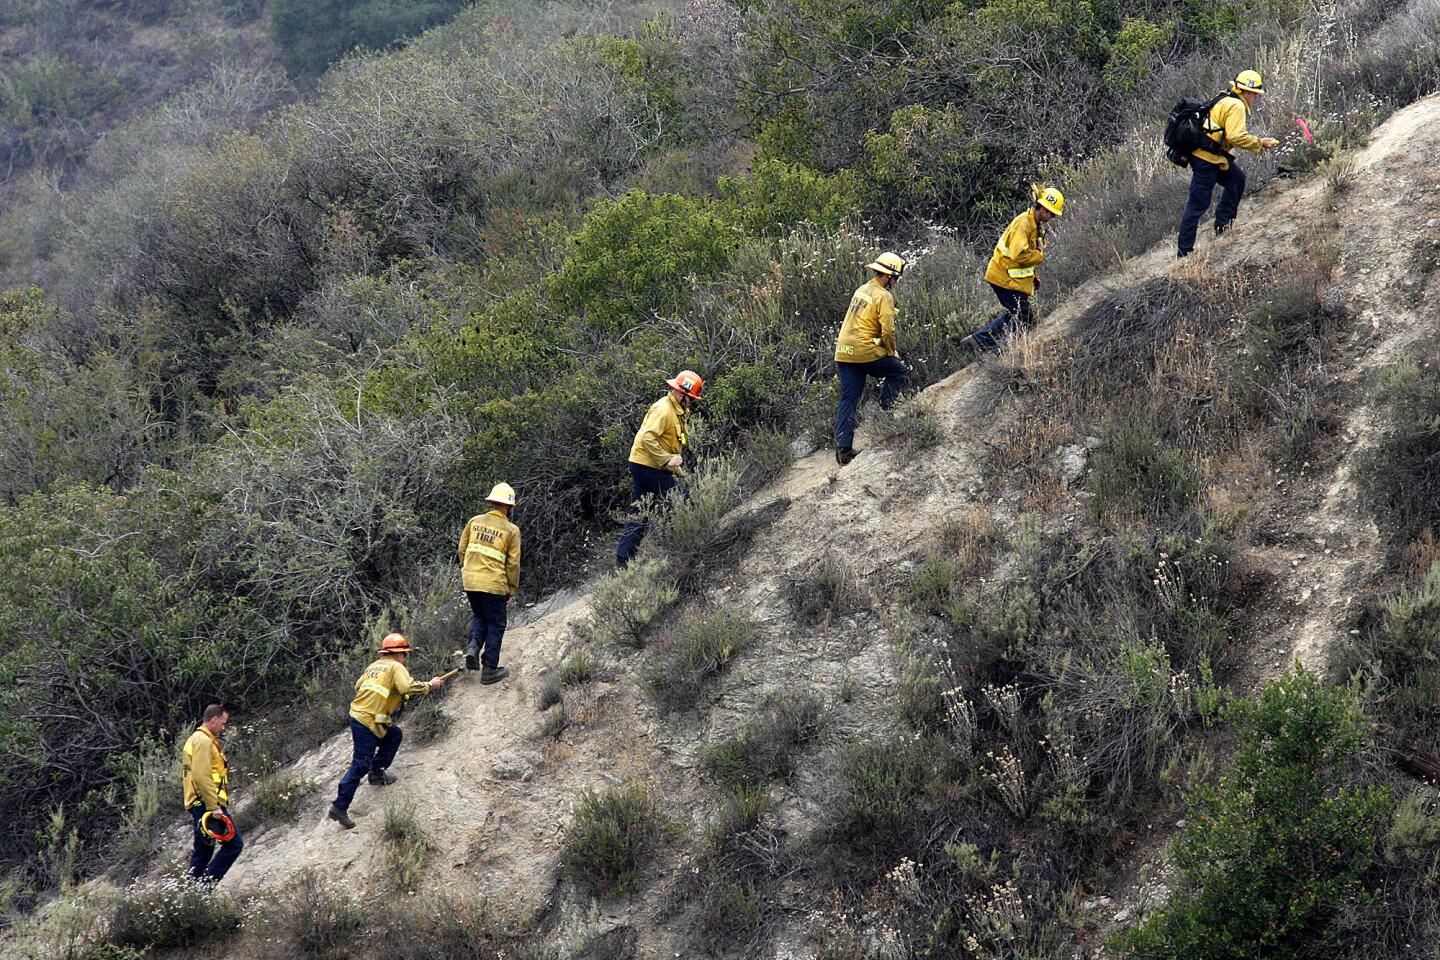 Photo Gallery: Glendale Police helicopter assists Gendale Fire Department gather hose left in hills after brush fire